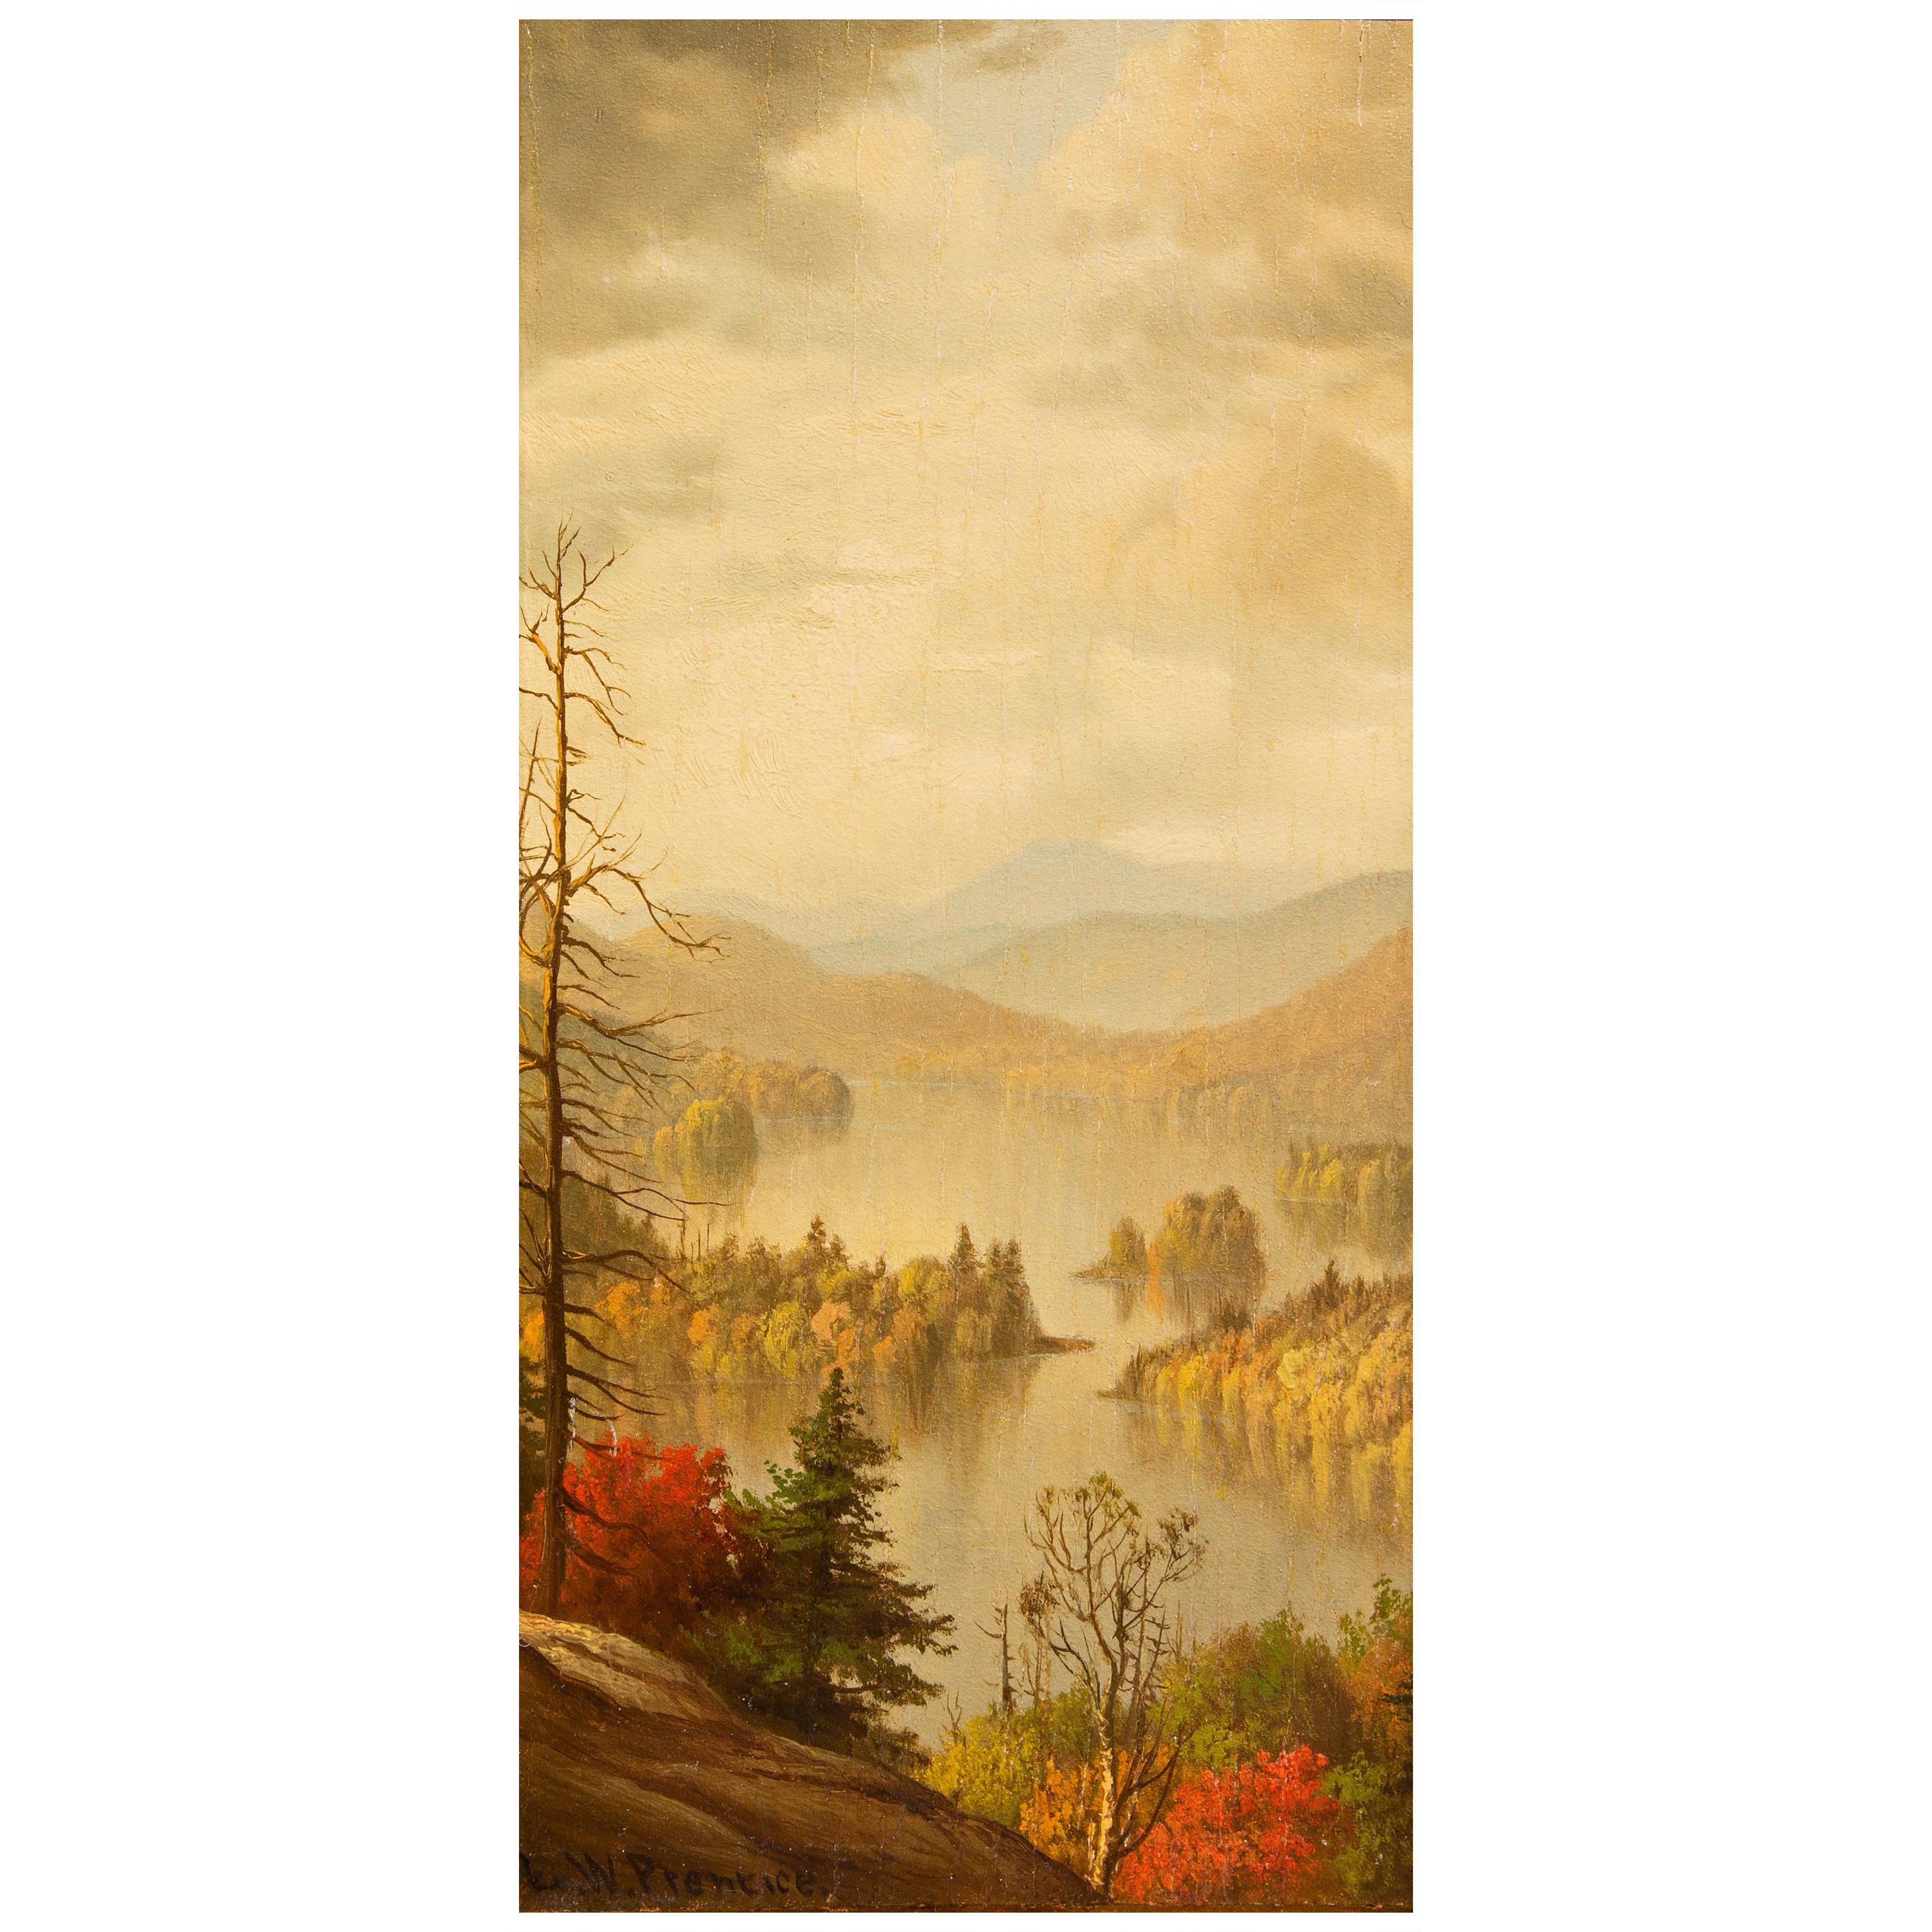 Pair of landscape paintings by Levi Wells Prentice (1851-1935). Views of Whiteface Mountain and Blue Mountain Lake. Oil on panel. One of several art works we are selling from a living estate.
Prentice was born in Lewis County, New York in the